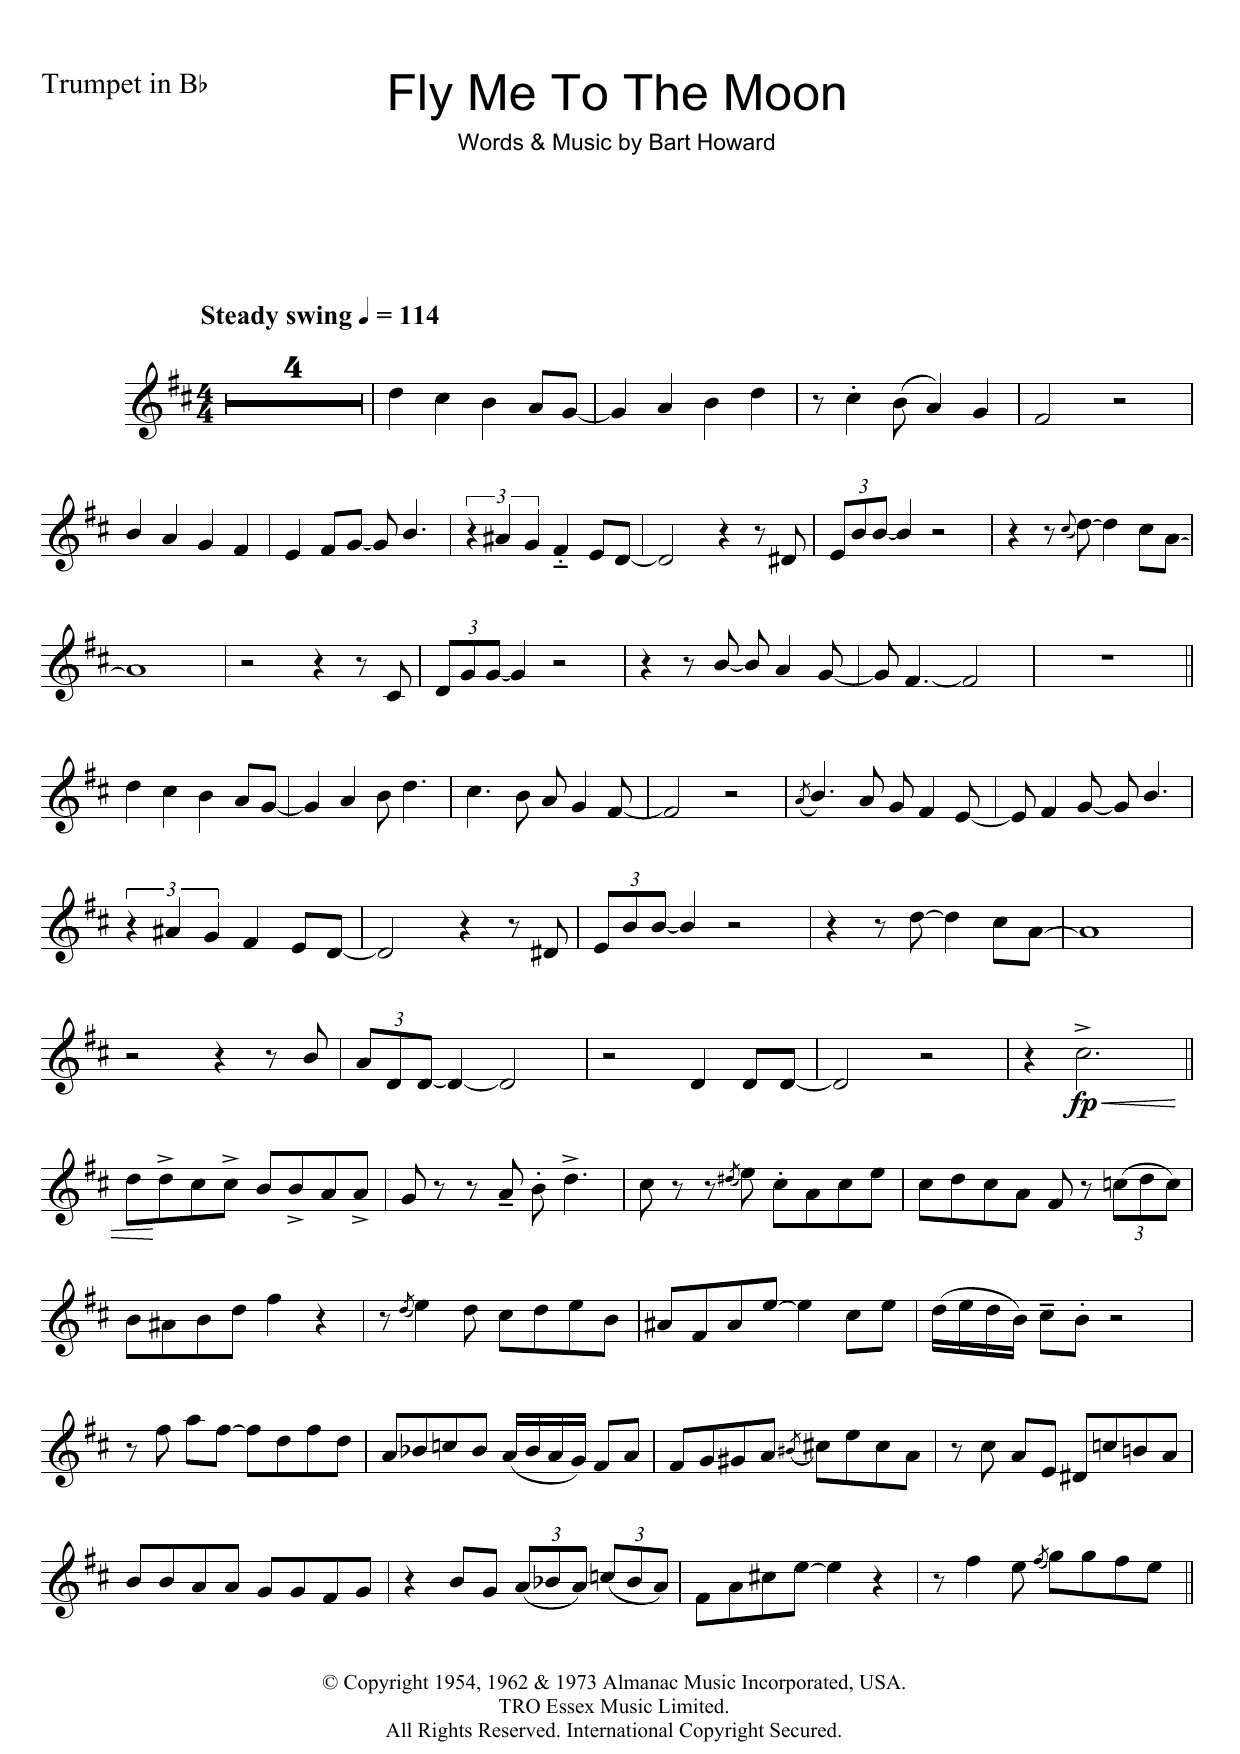 Download Julie London Fly Me To The Moon (In Other Words) Sheet Music